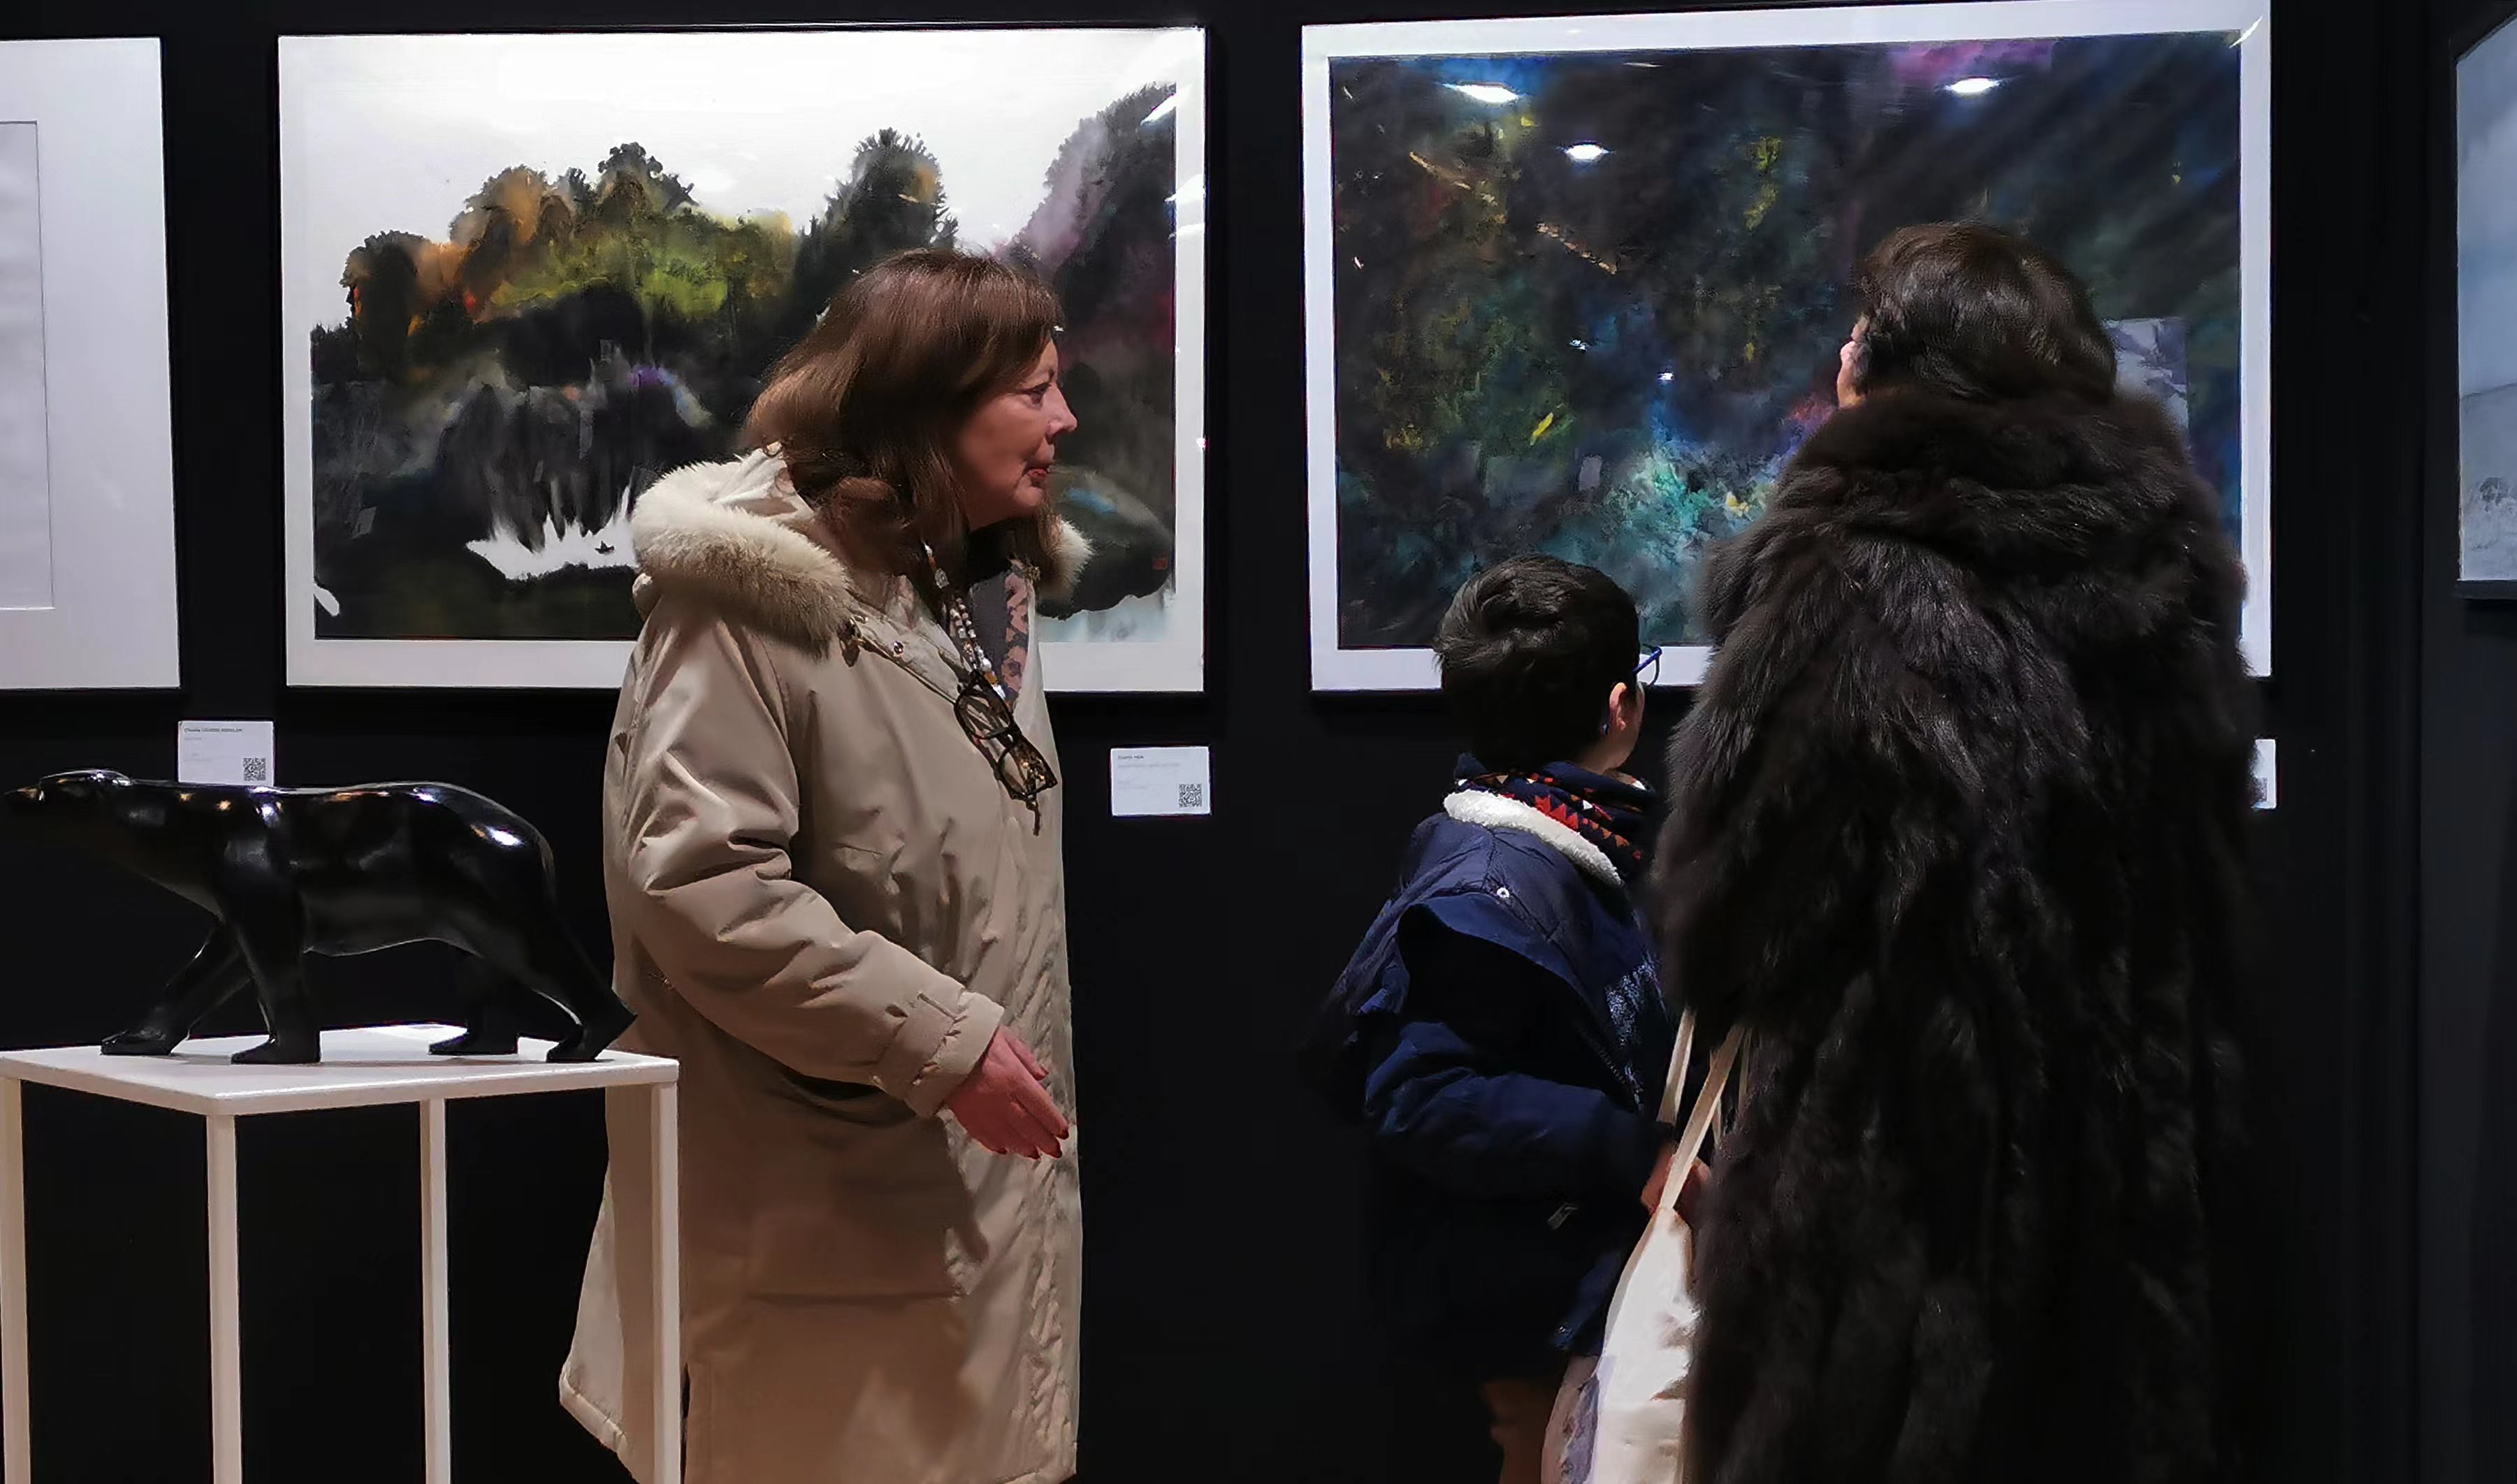 Water ink art shines at Salon d'Automne in France